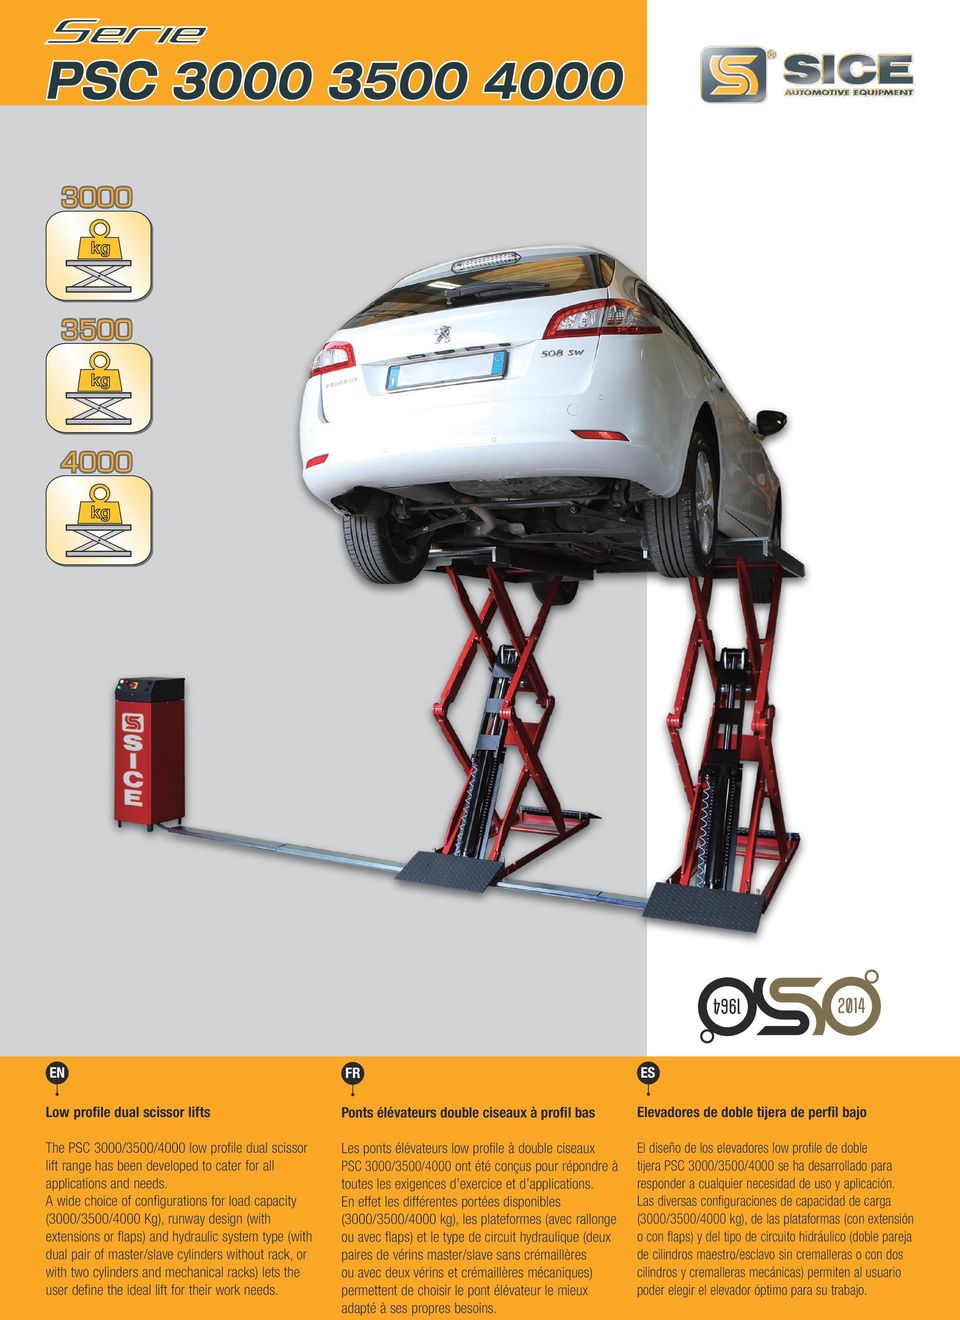 two cylinders and mechanical racks) lets the user define the ideal lift for their work needs.